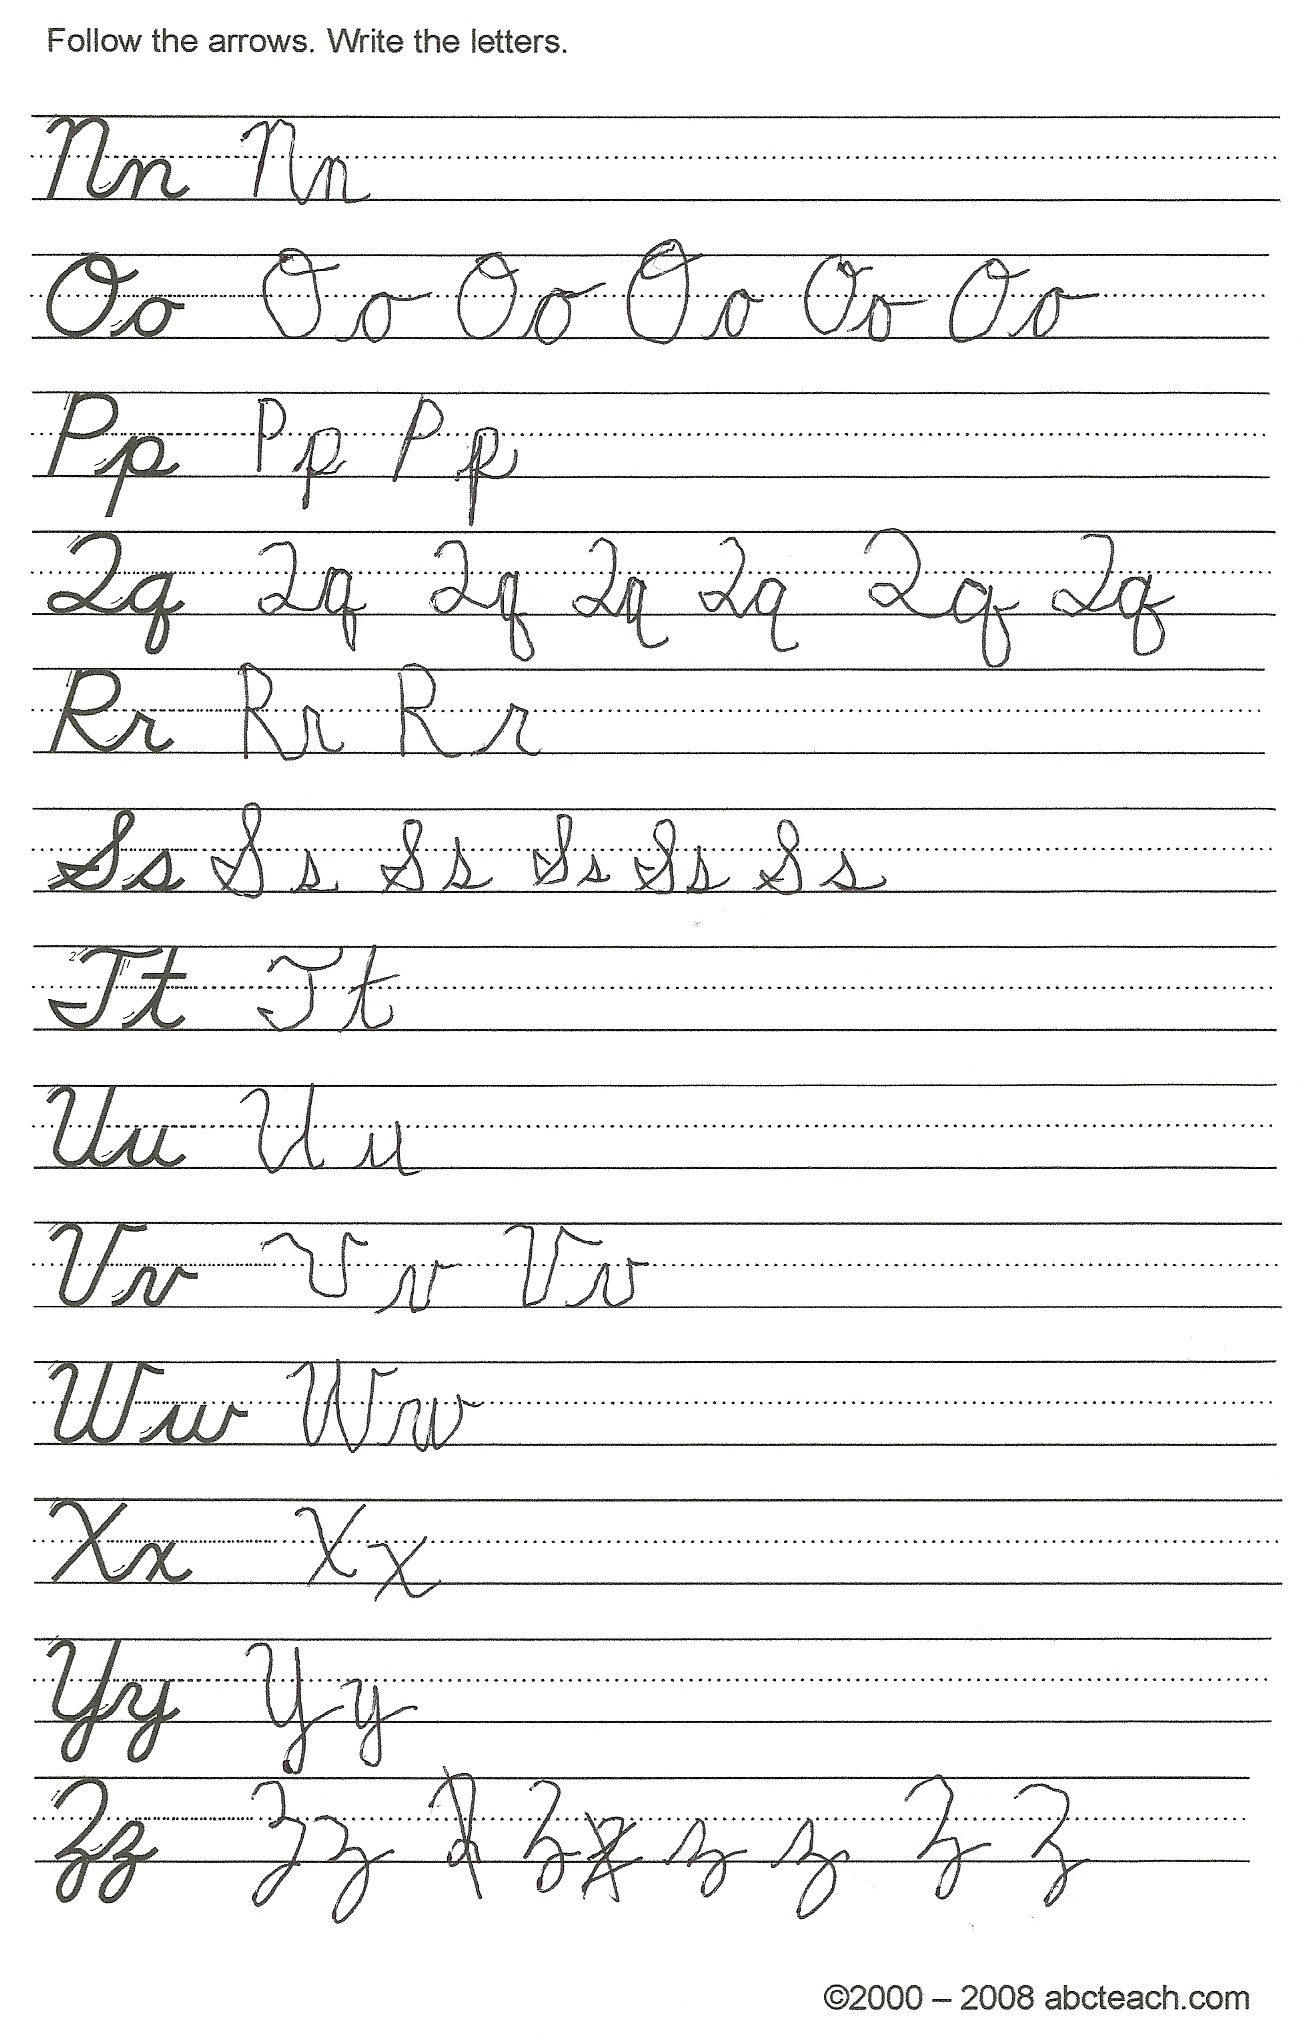 Tracing Letters On Worksheets For Handwriting Practice For Occupational 